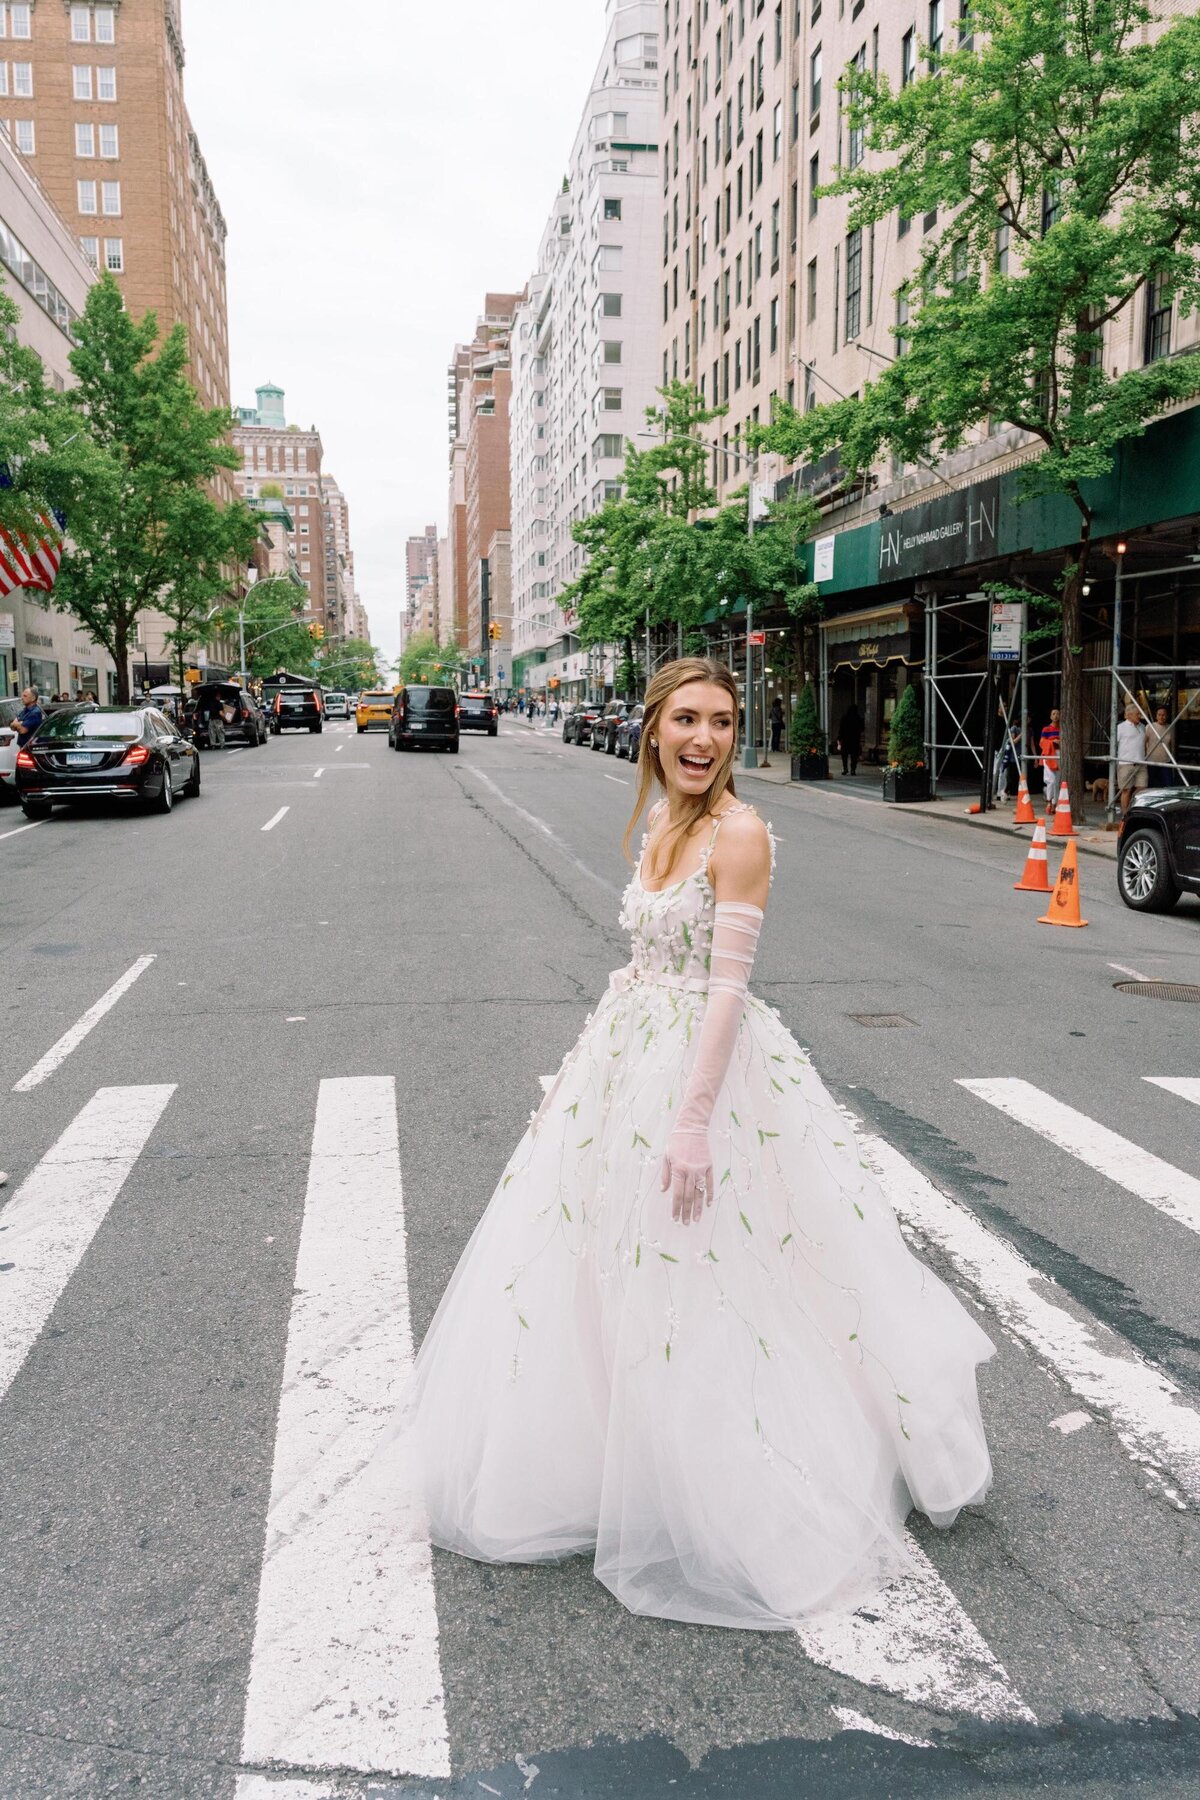 erica-renee-beauty-hair-and-makeup-duo-traveling-team-NYC-bride-street-shot-crosswalk-carlyle-hotel-NYC-over-the-moon-bride